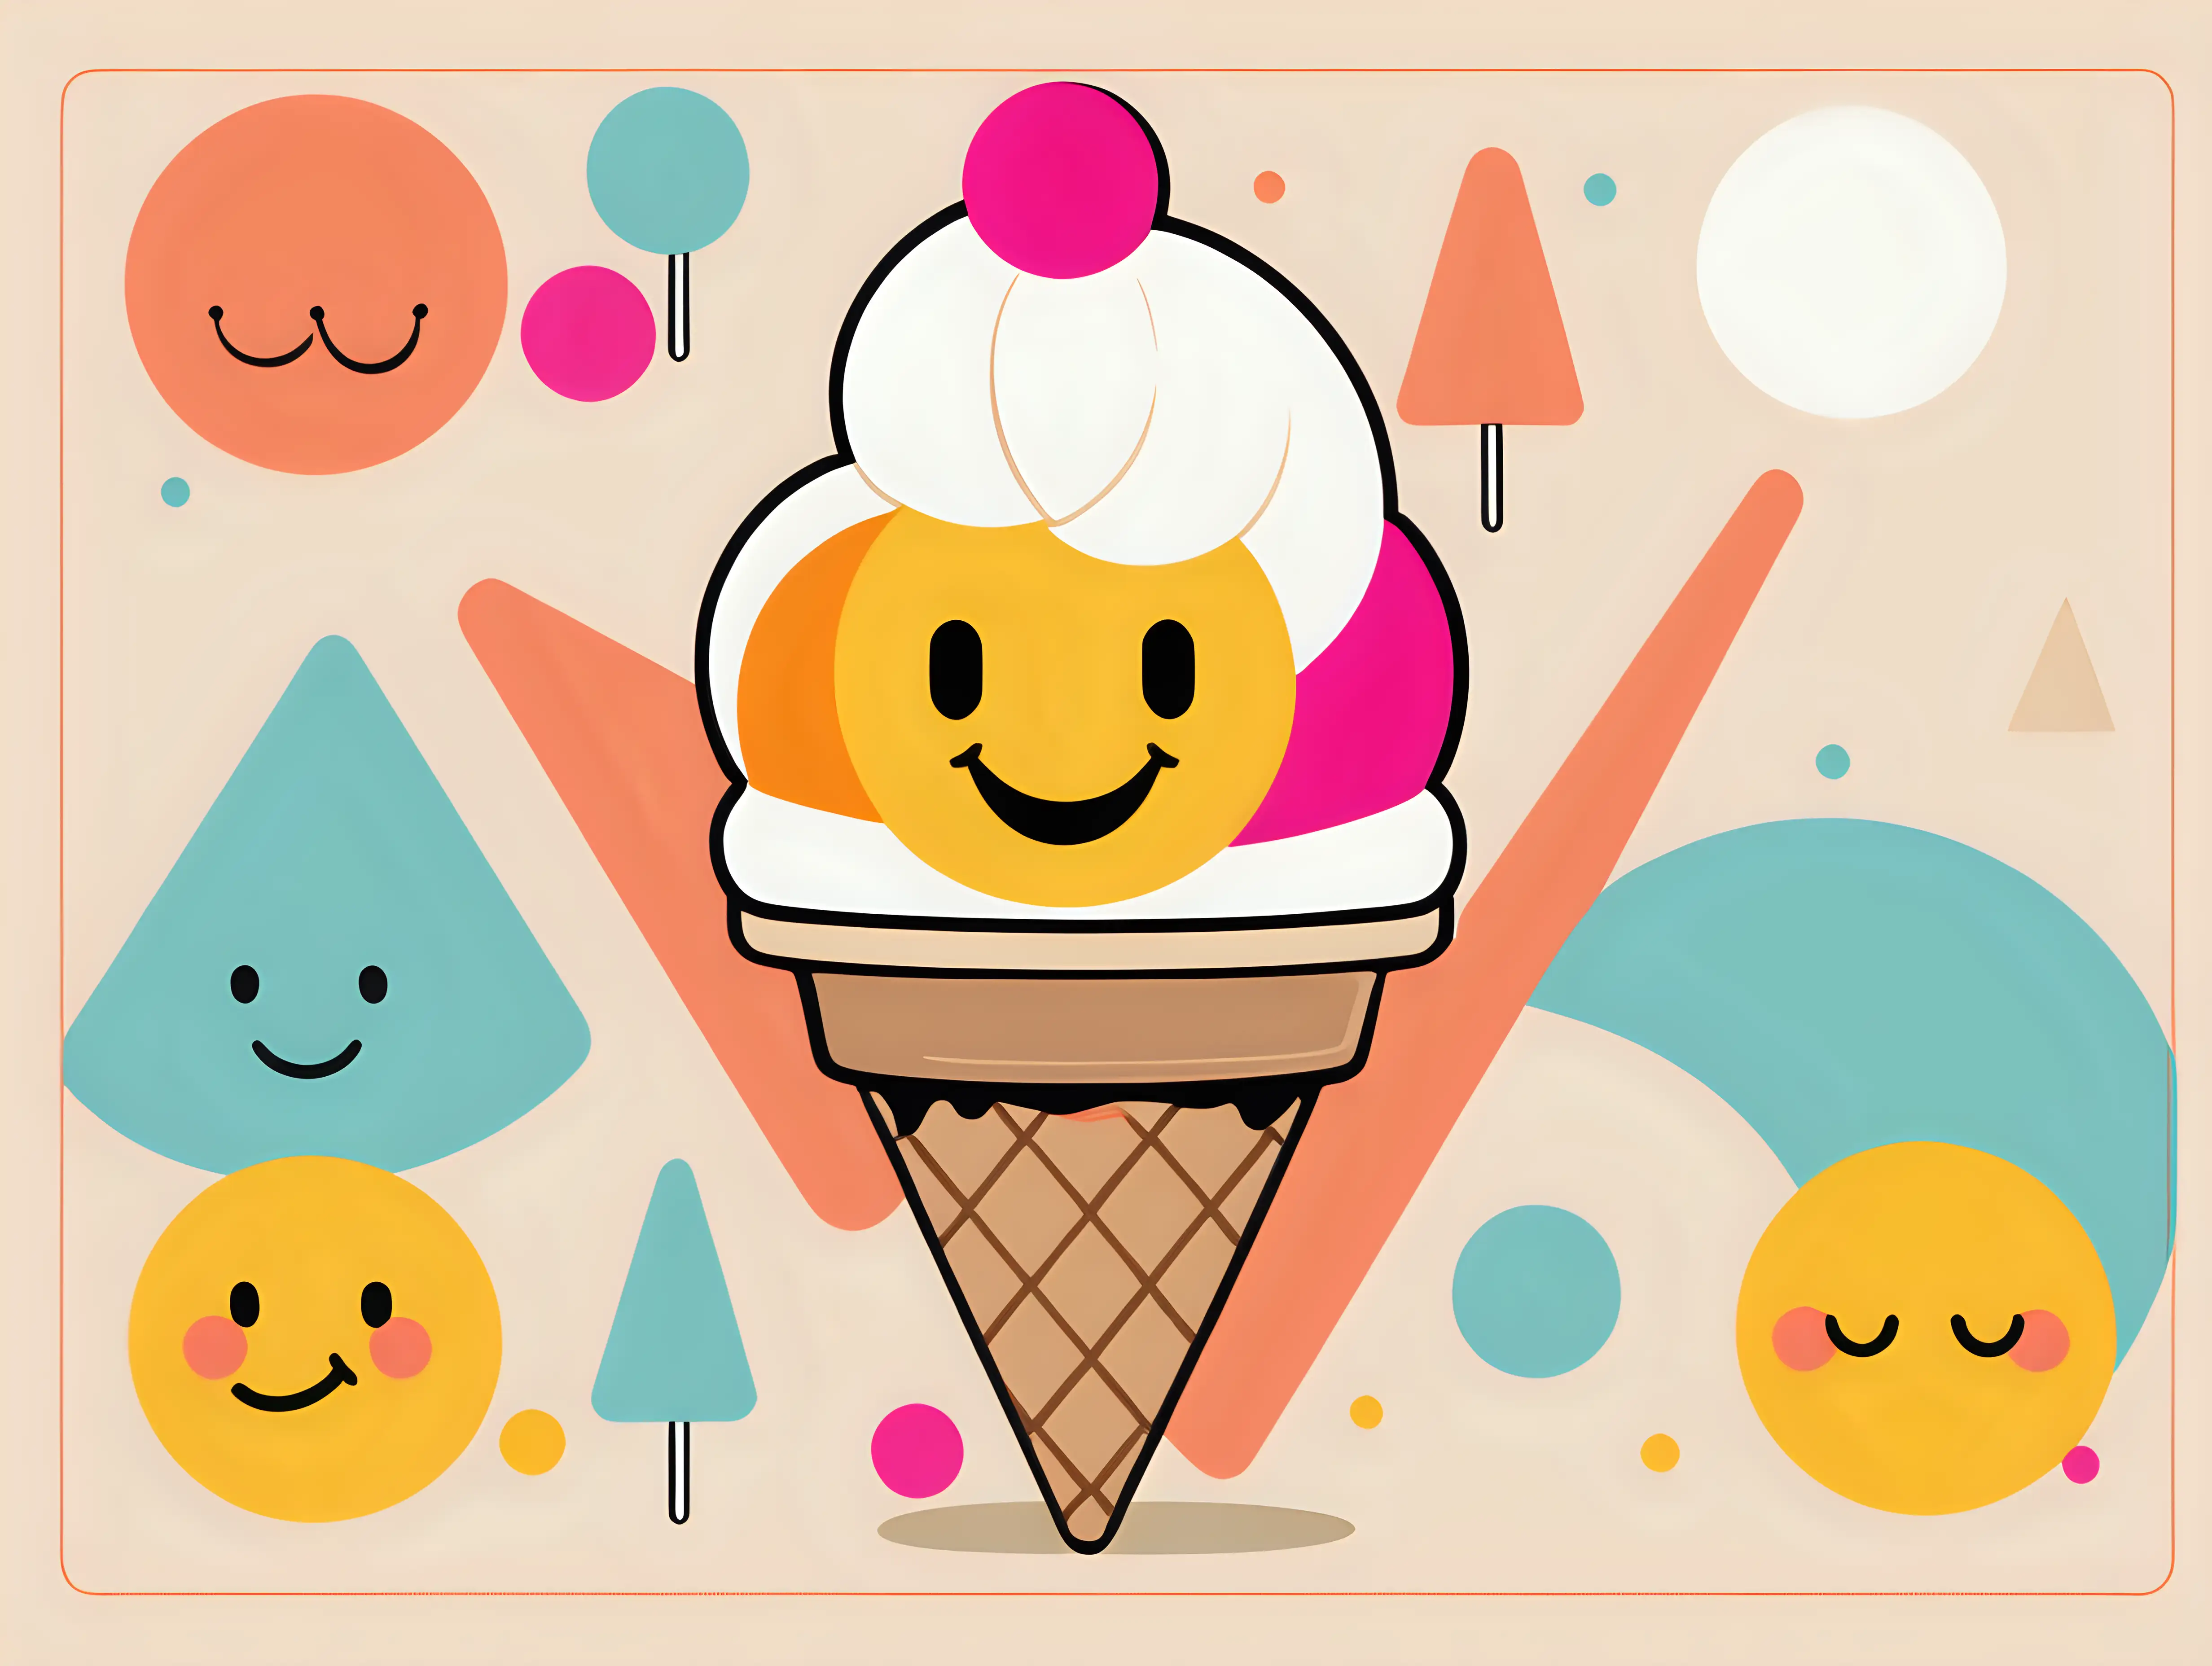  minimalist 1970's retro style ice cream with a smiley face on bright geometric shapes